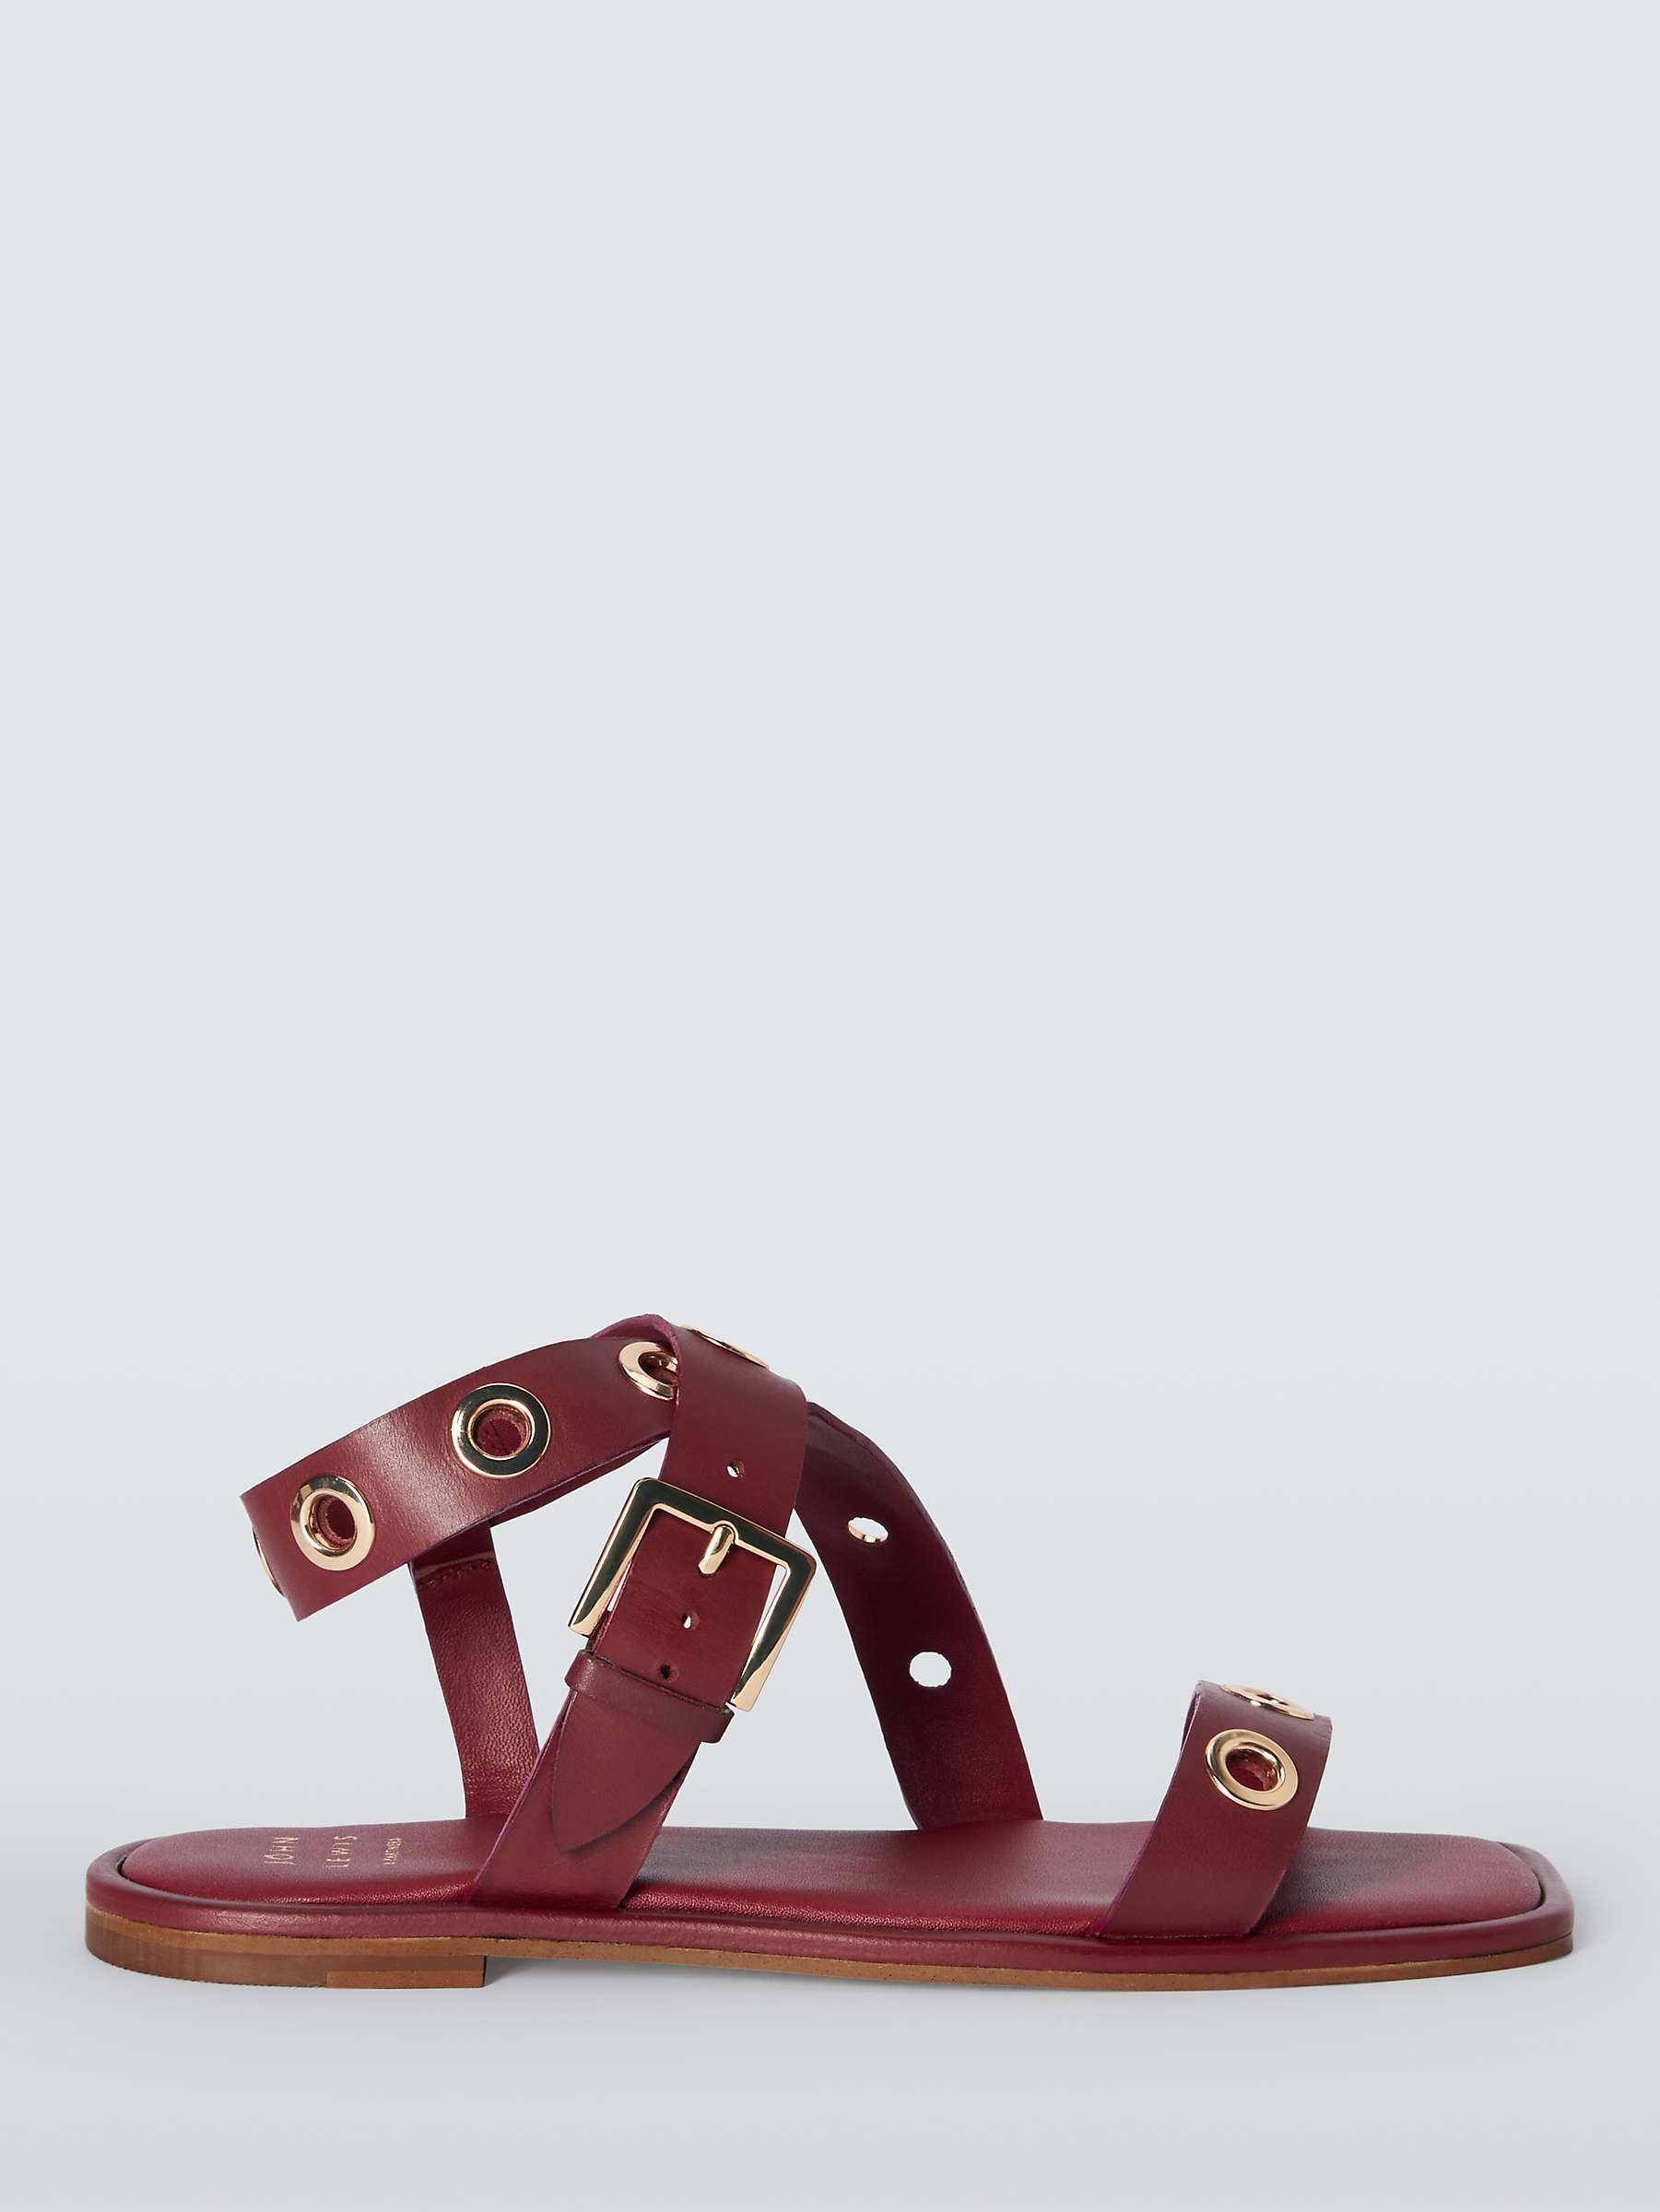 Buy John Lewis Luxe Leather Eyelet Strappy Sandals, Rhubarb Online at johnlewis.com